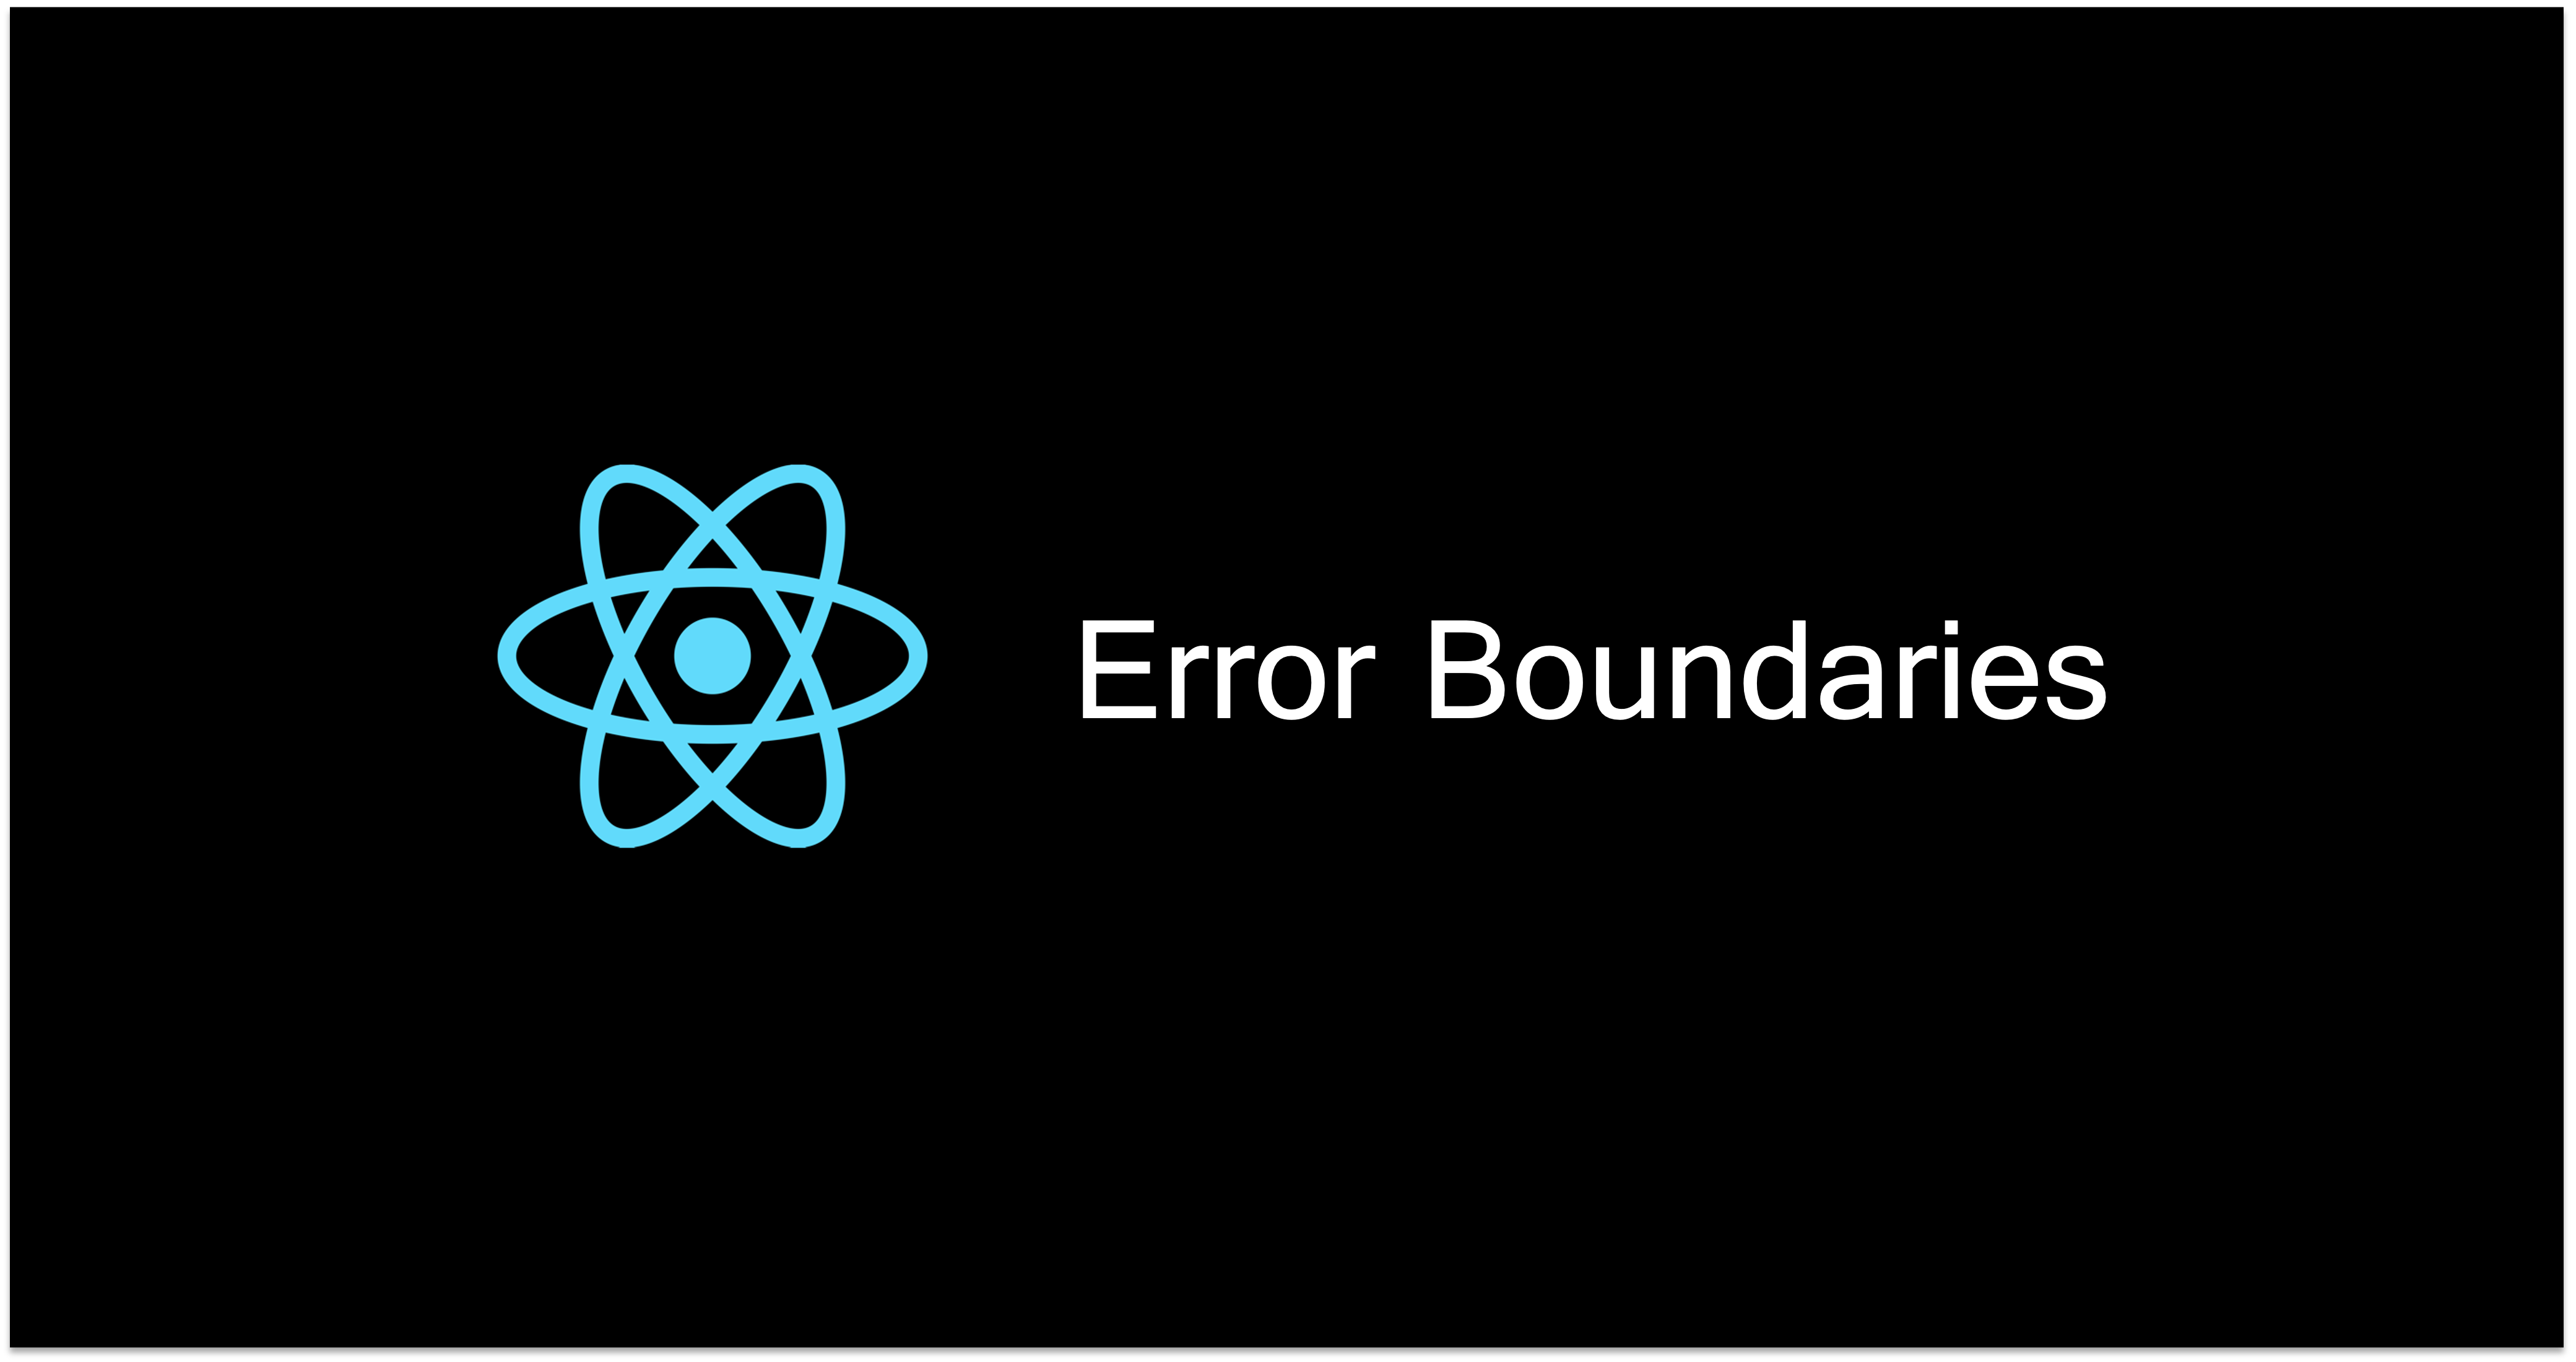 React's logo and a text saying "error boundaries" on a black background